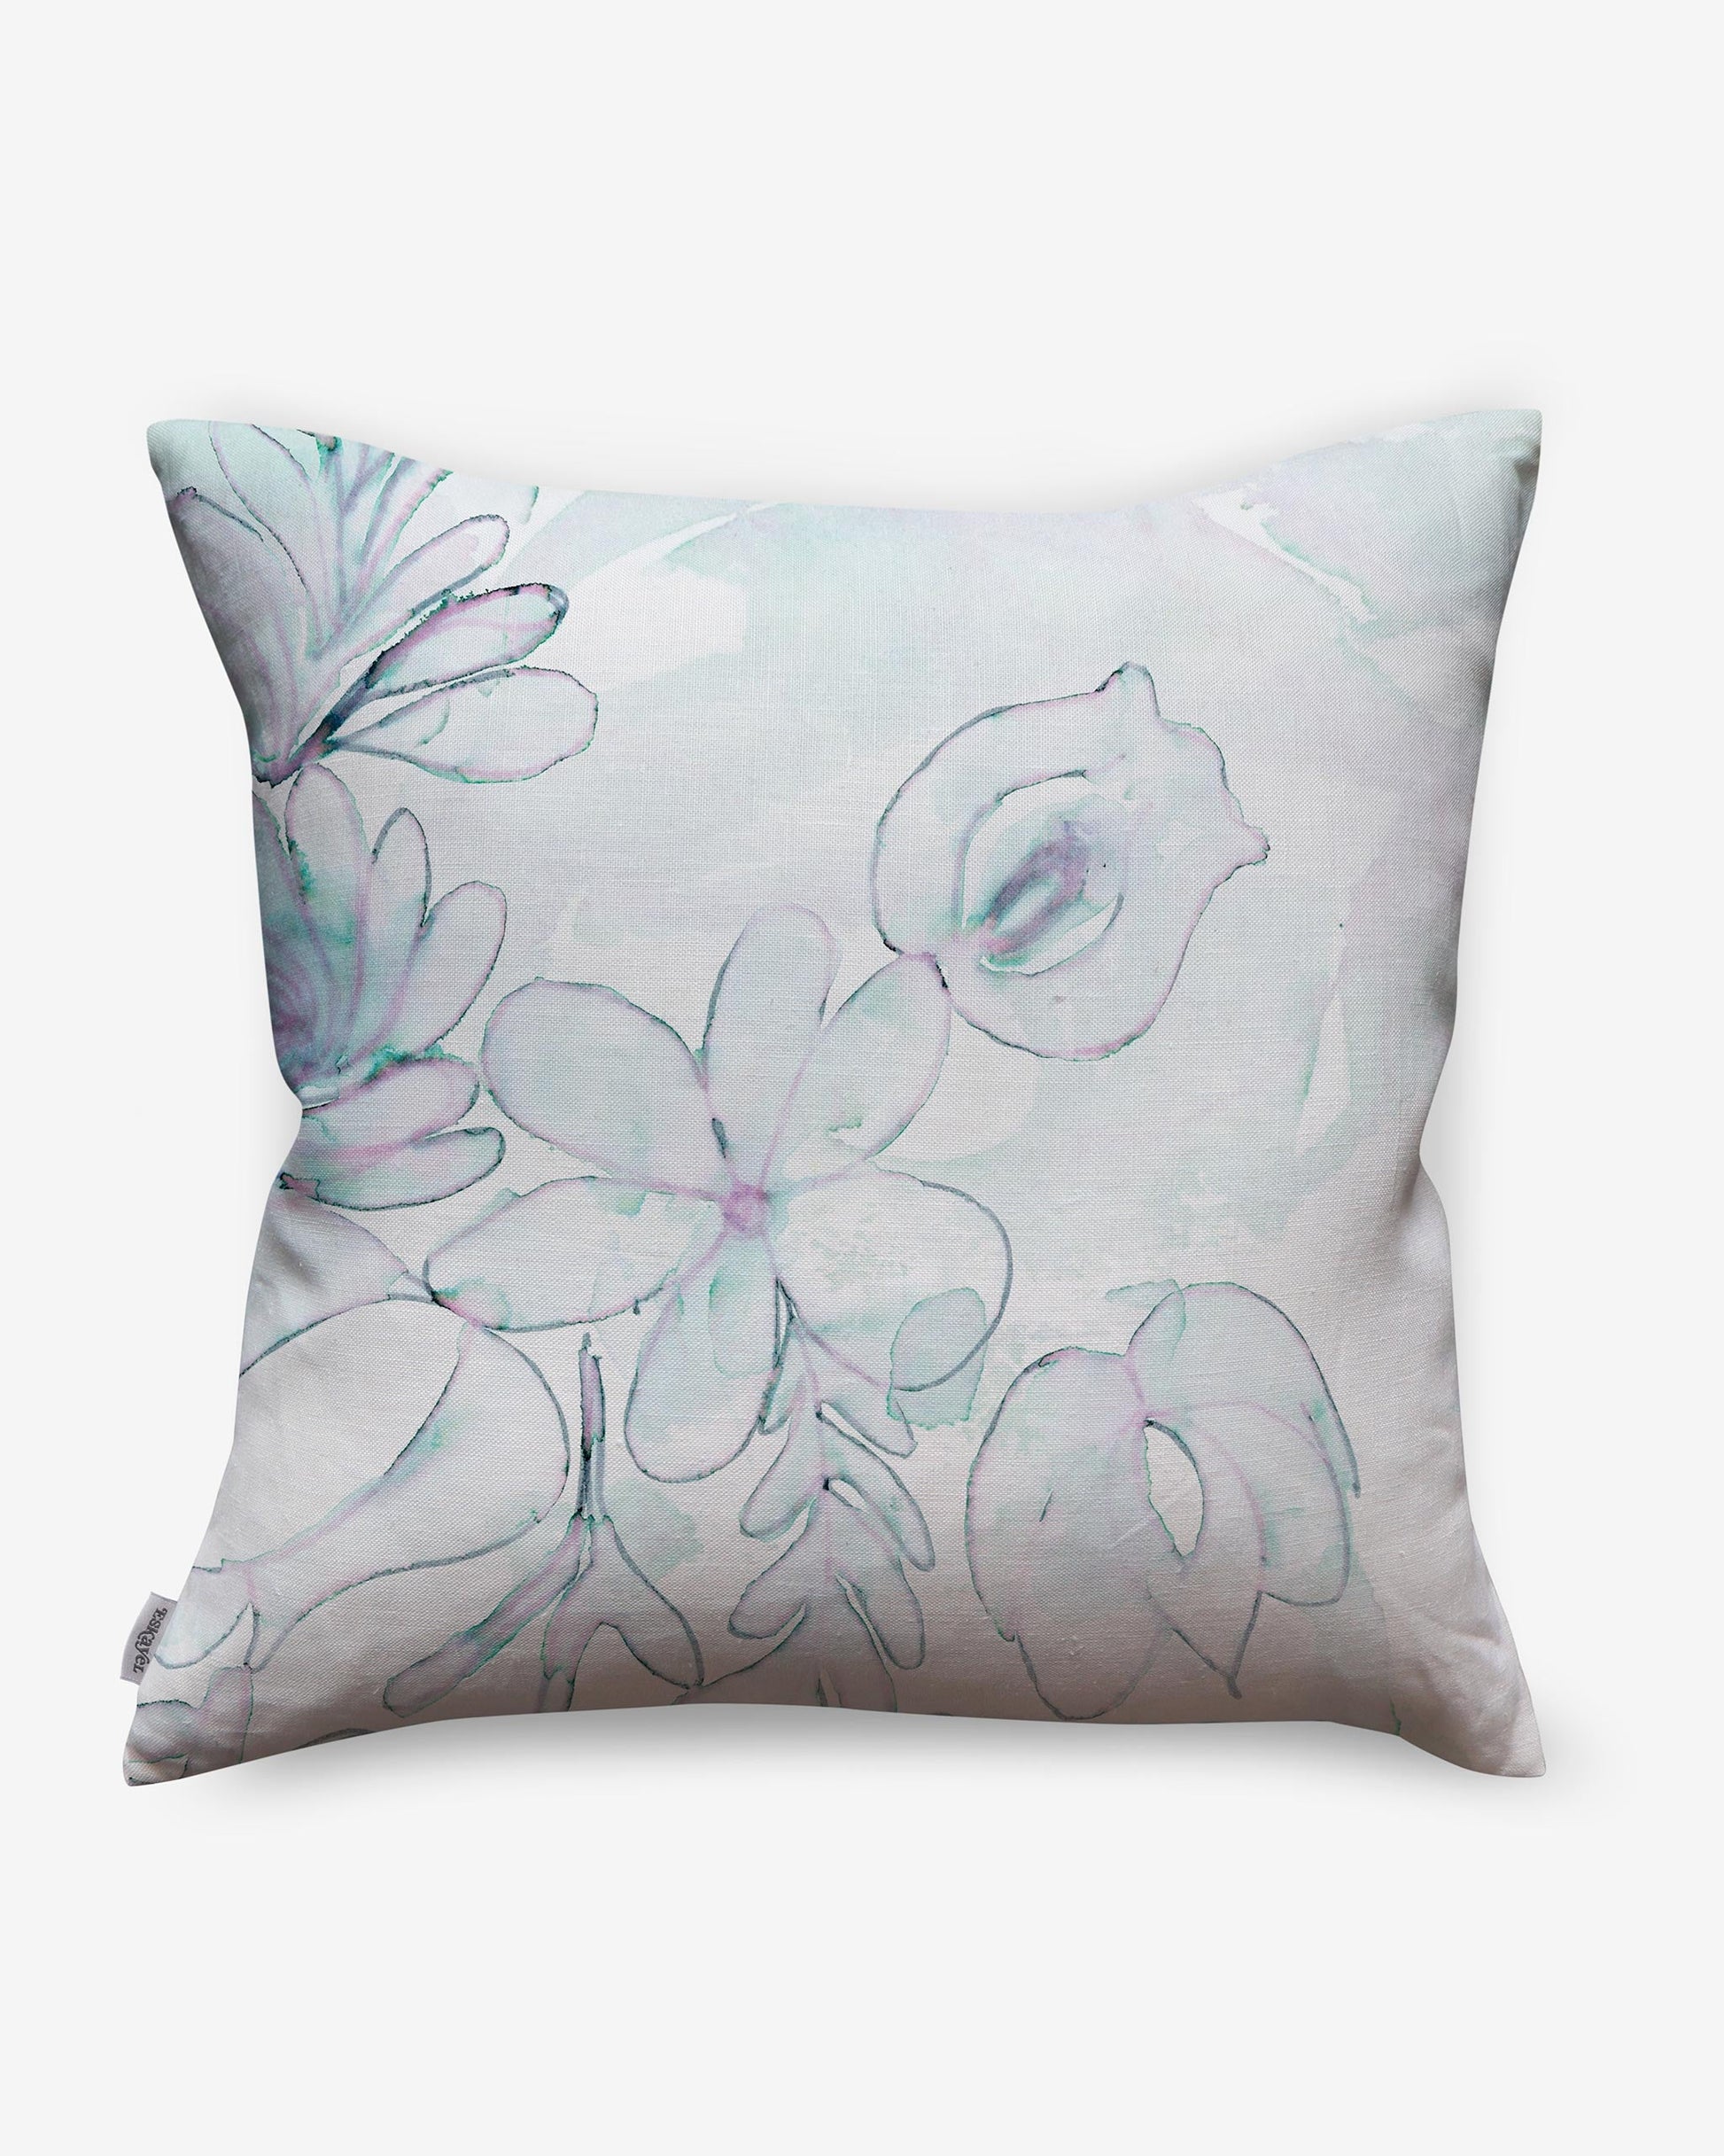 A Belize Blooms Pillow made from luxury fabric with a watercolor floral design inspired by Jardin Belize Blooms